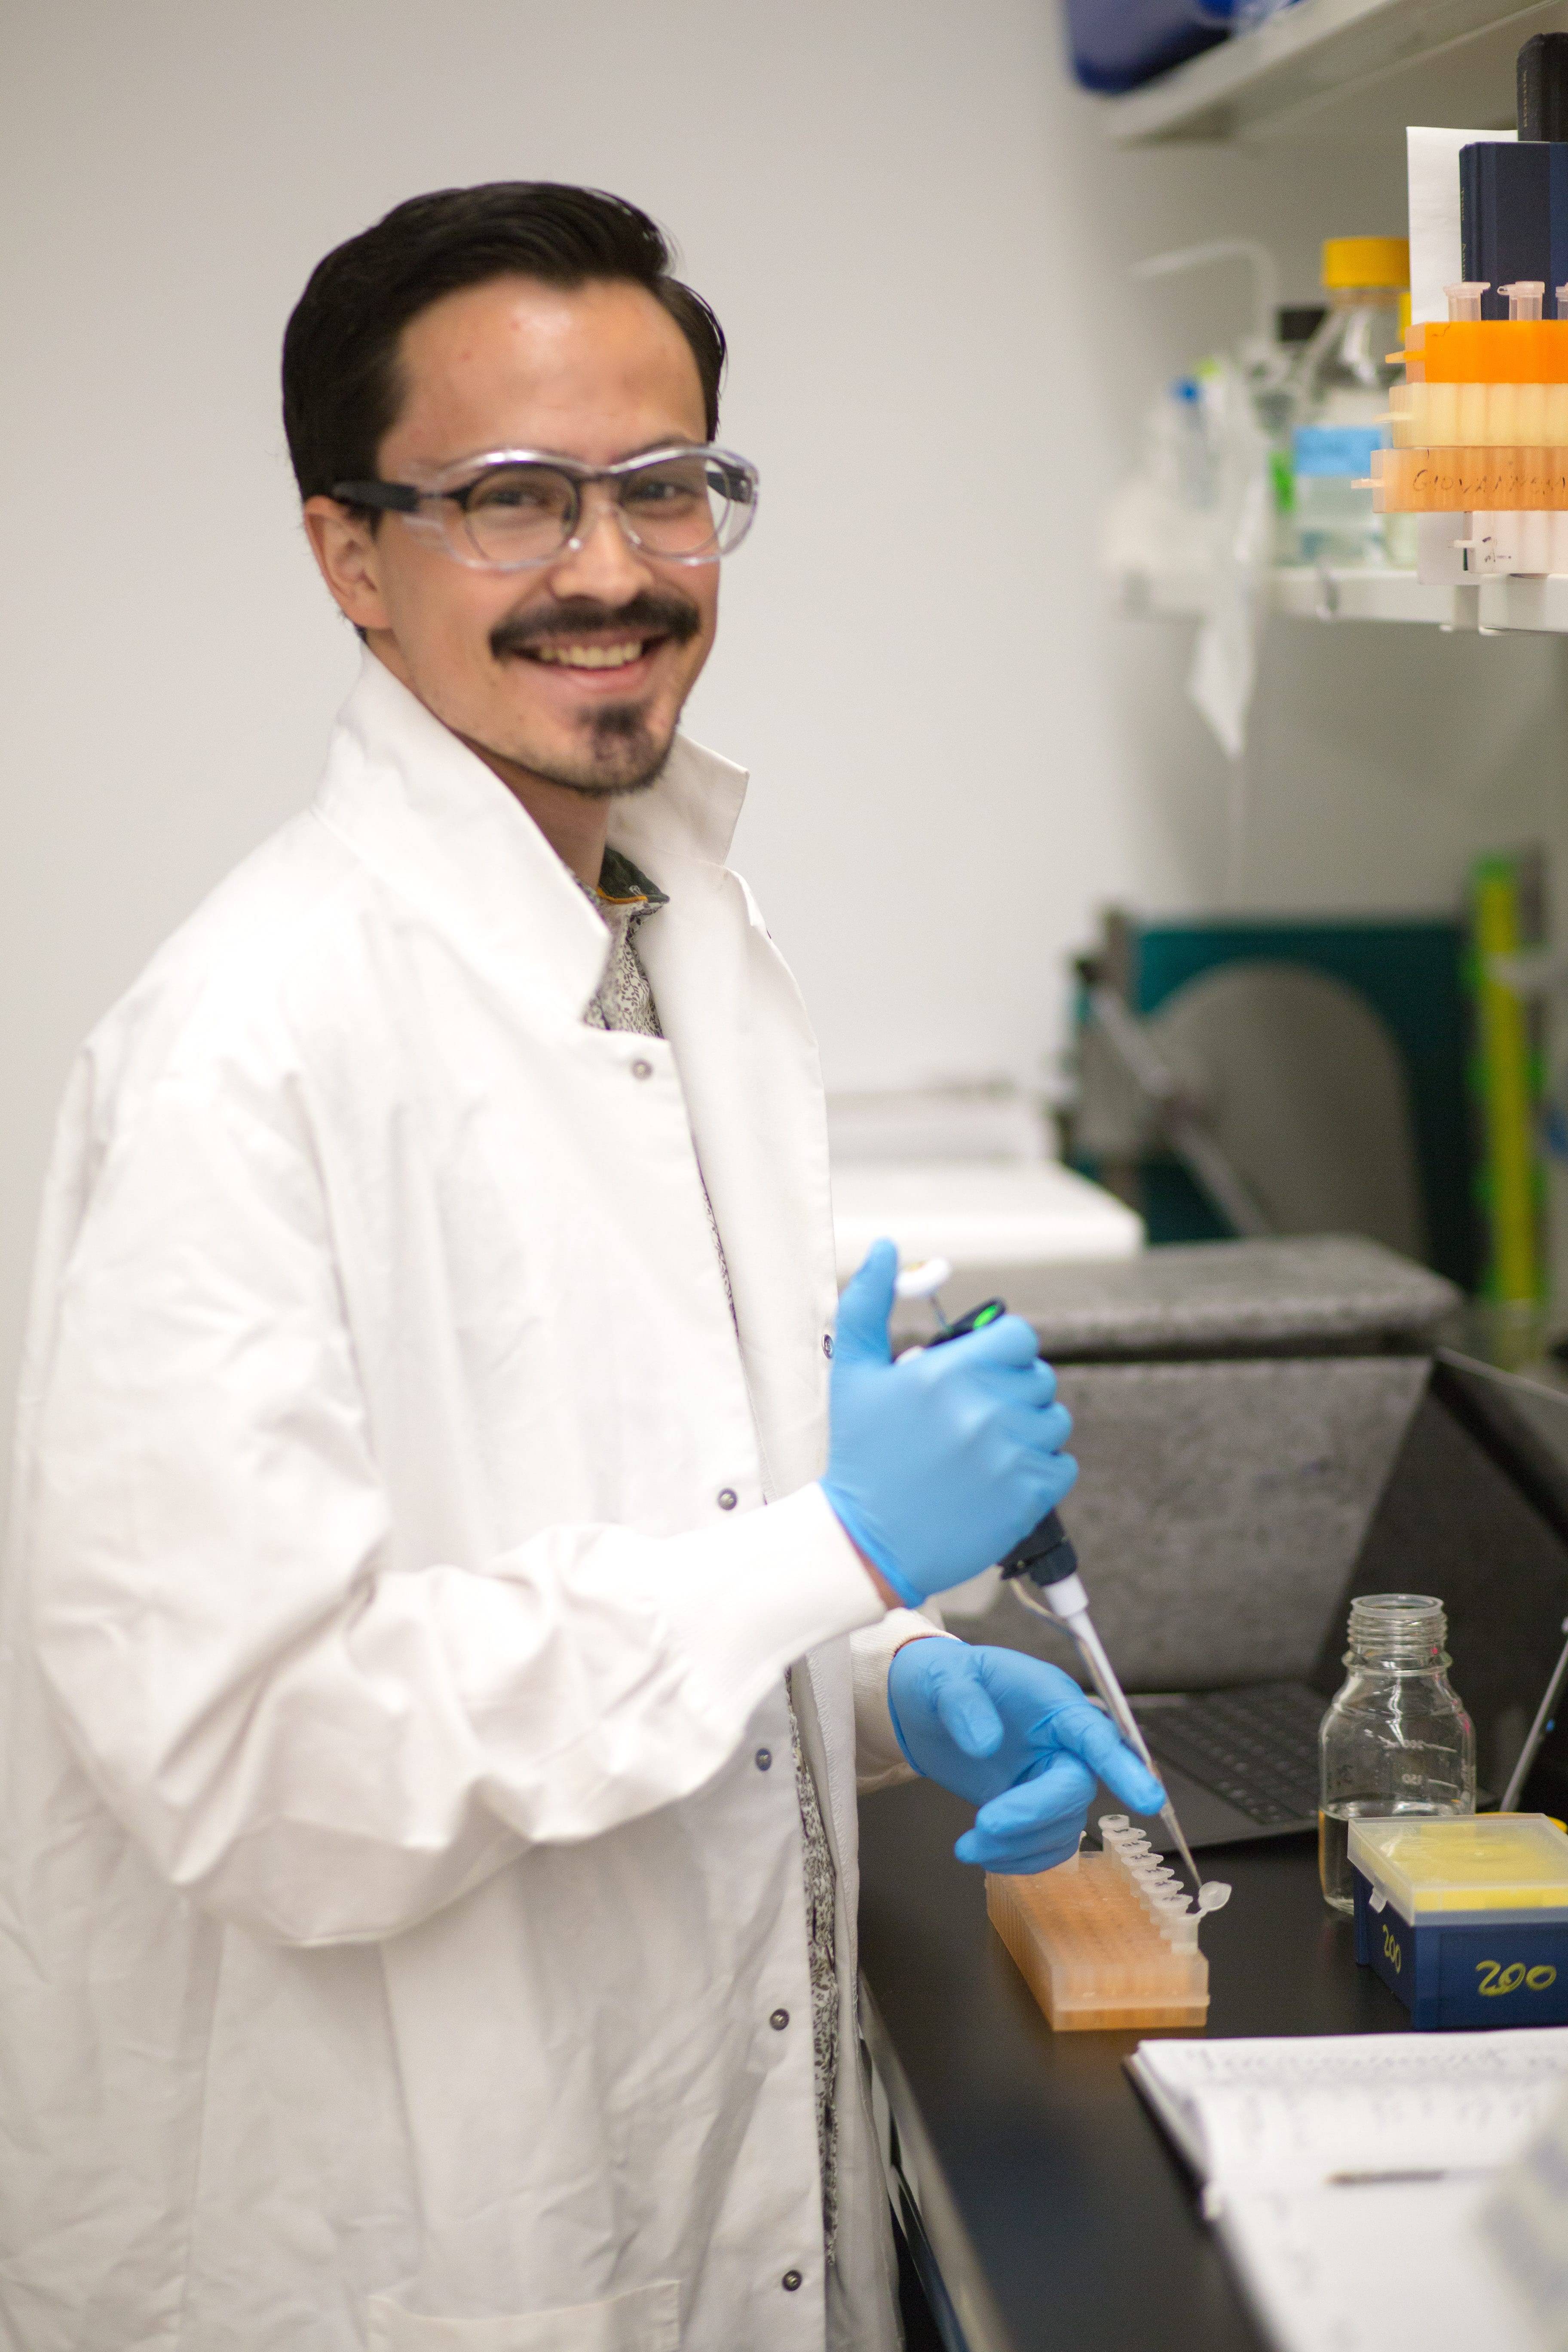 Scientist smiling and holding a pipette in a lab